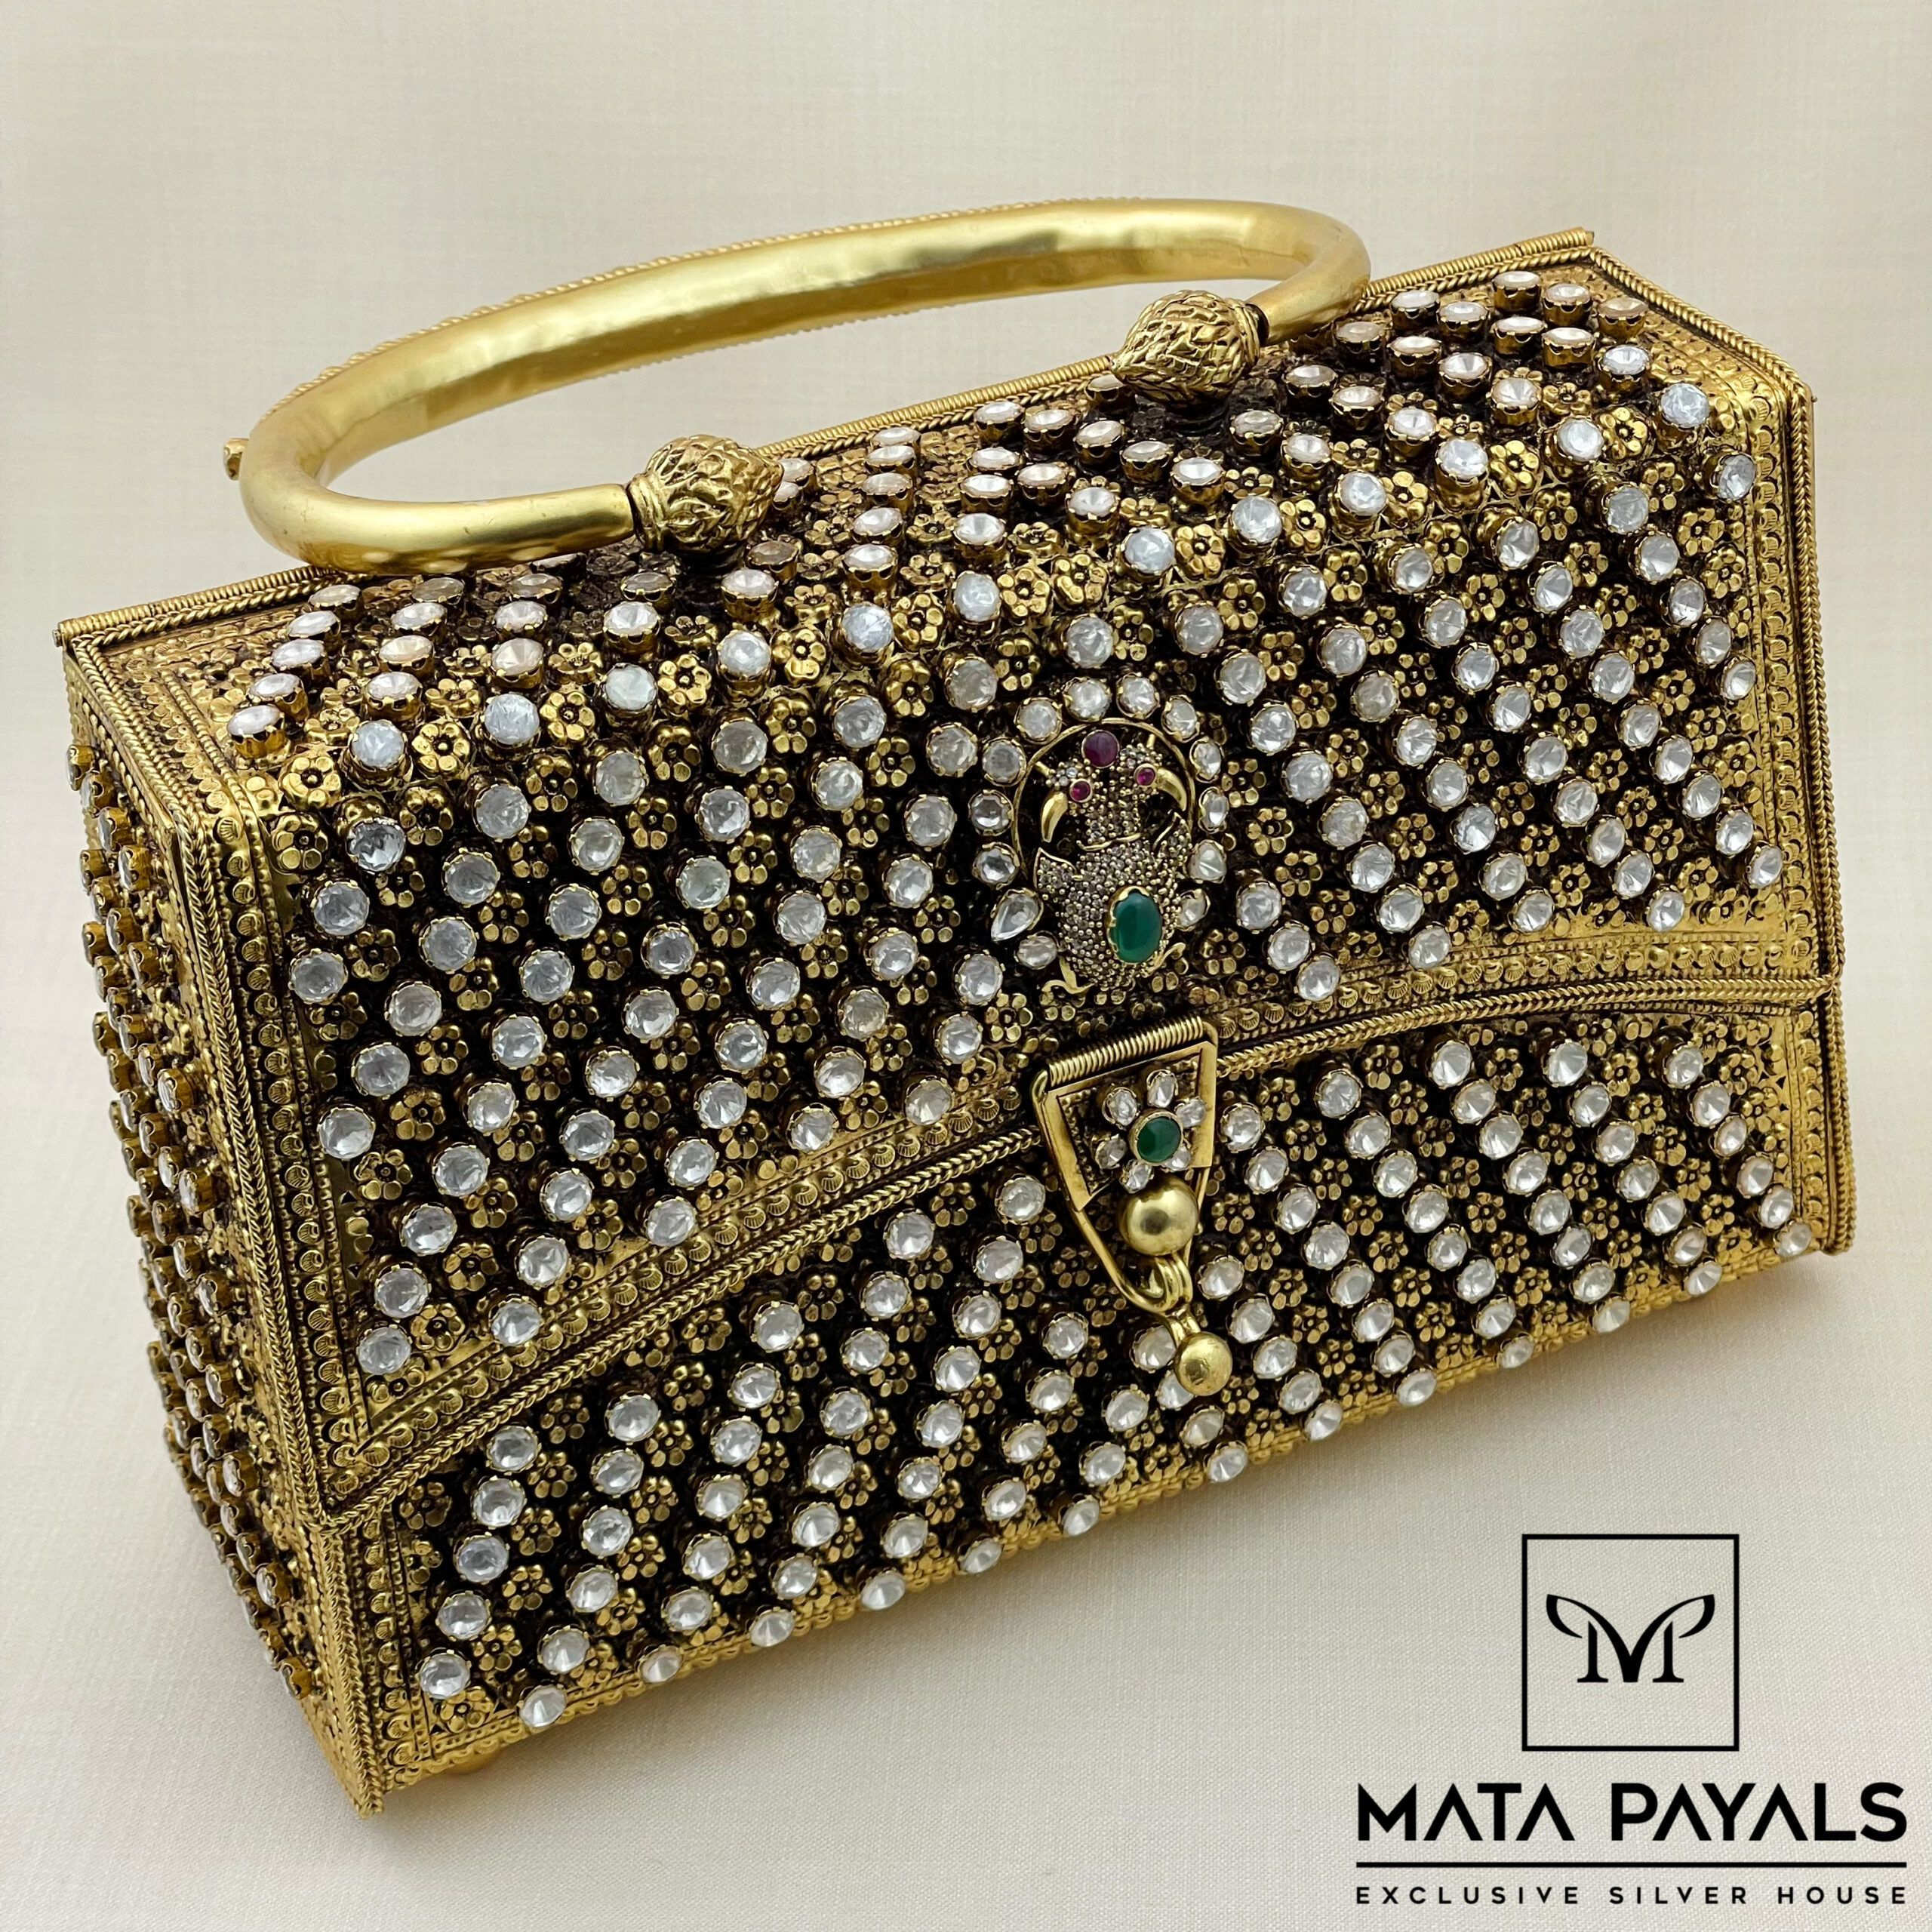 Buy Indian Bridal Purse Online In India - Etsy India